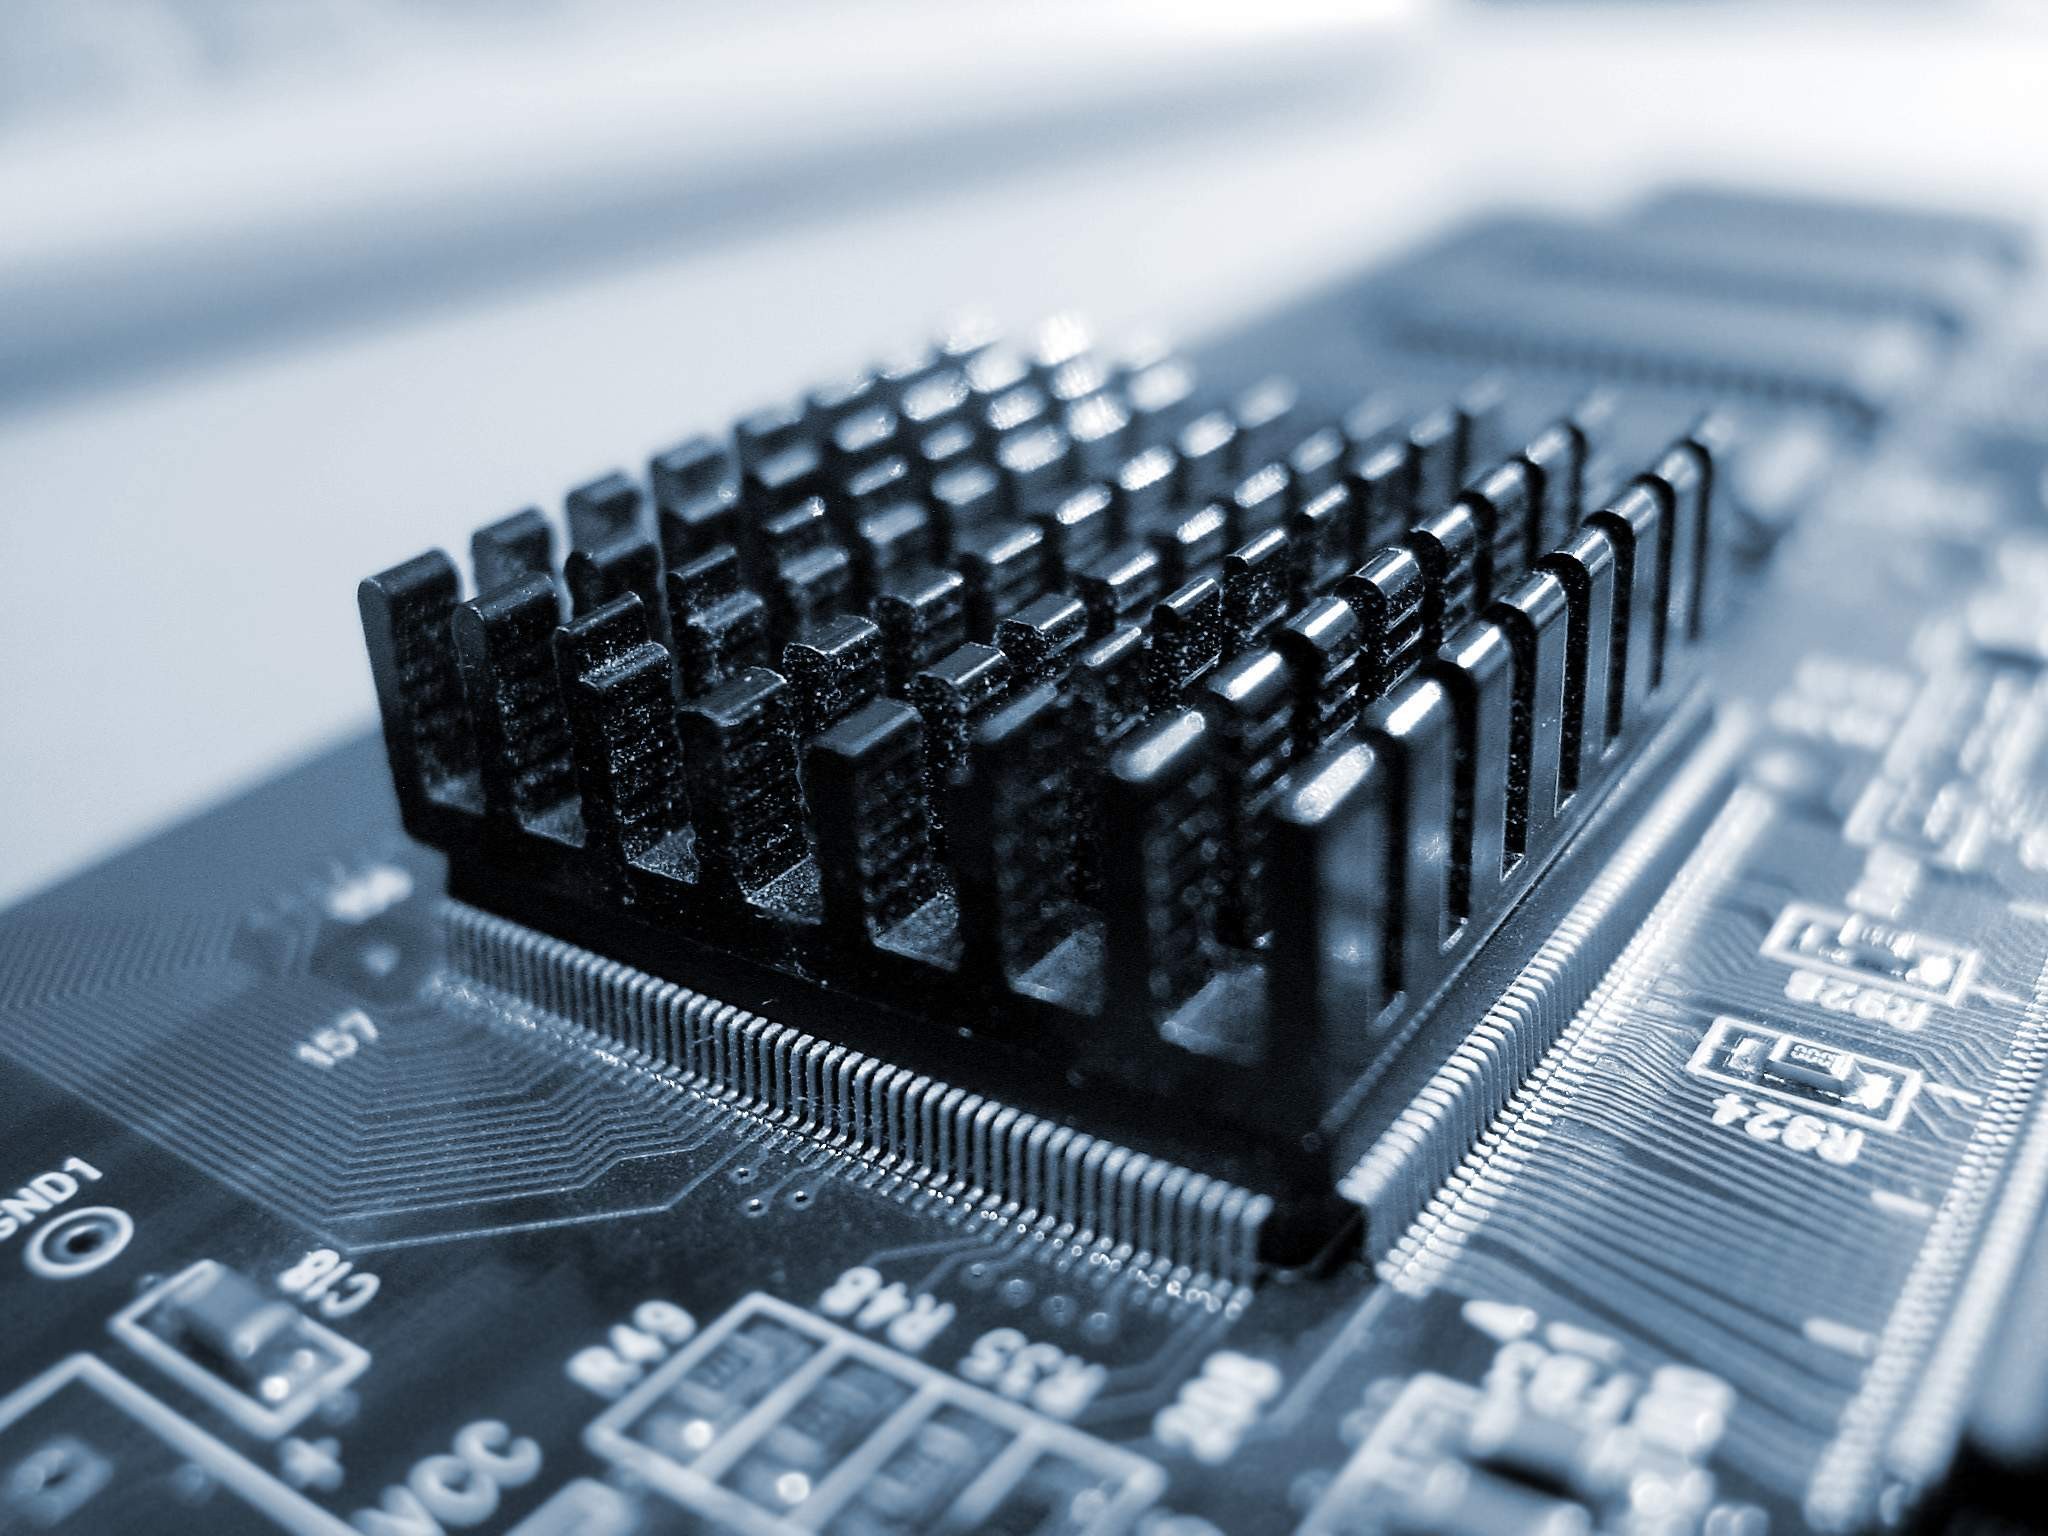 Wallpapers : technology, circuit boards, multimedia, personal computer hardware, close up, electronic device, computer keyboard, musical keyboard, computer hardware, microcontroller 2048x1536